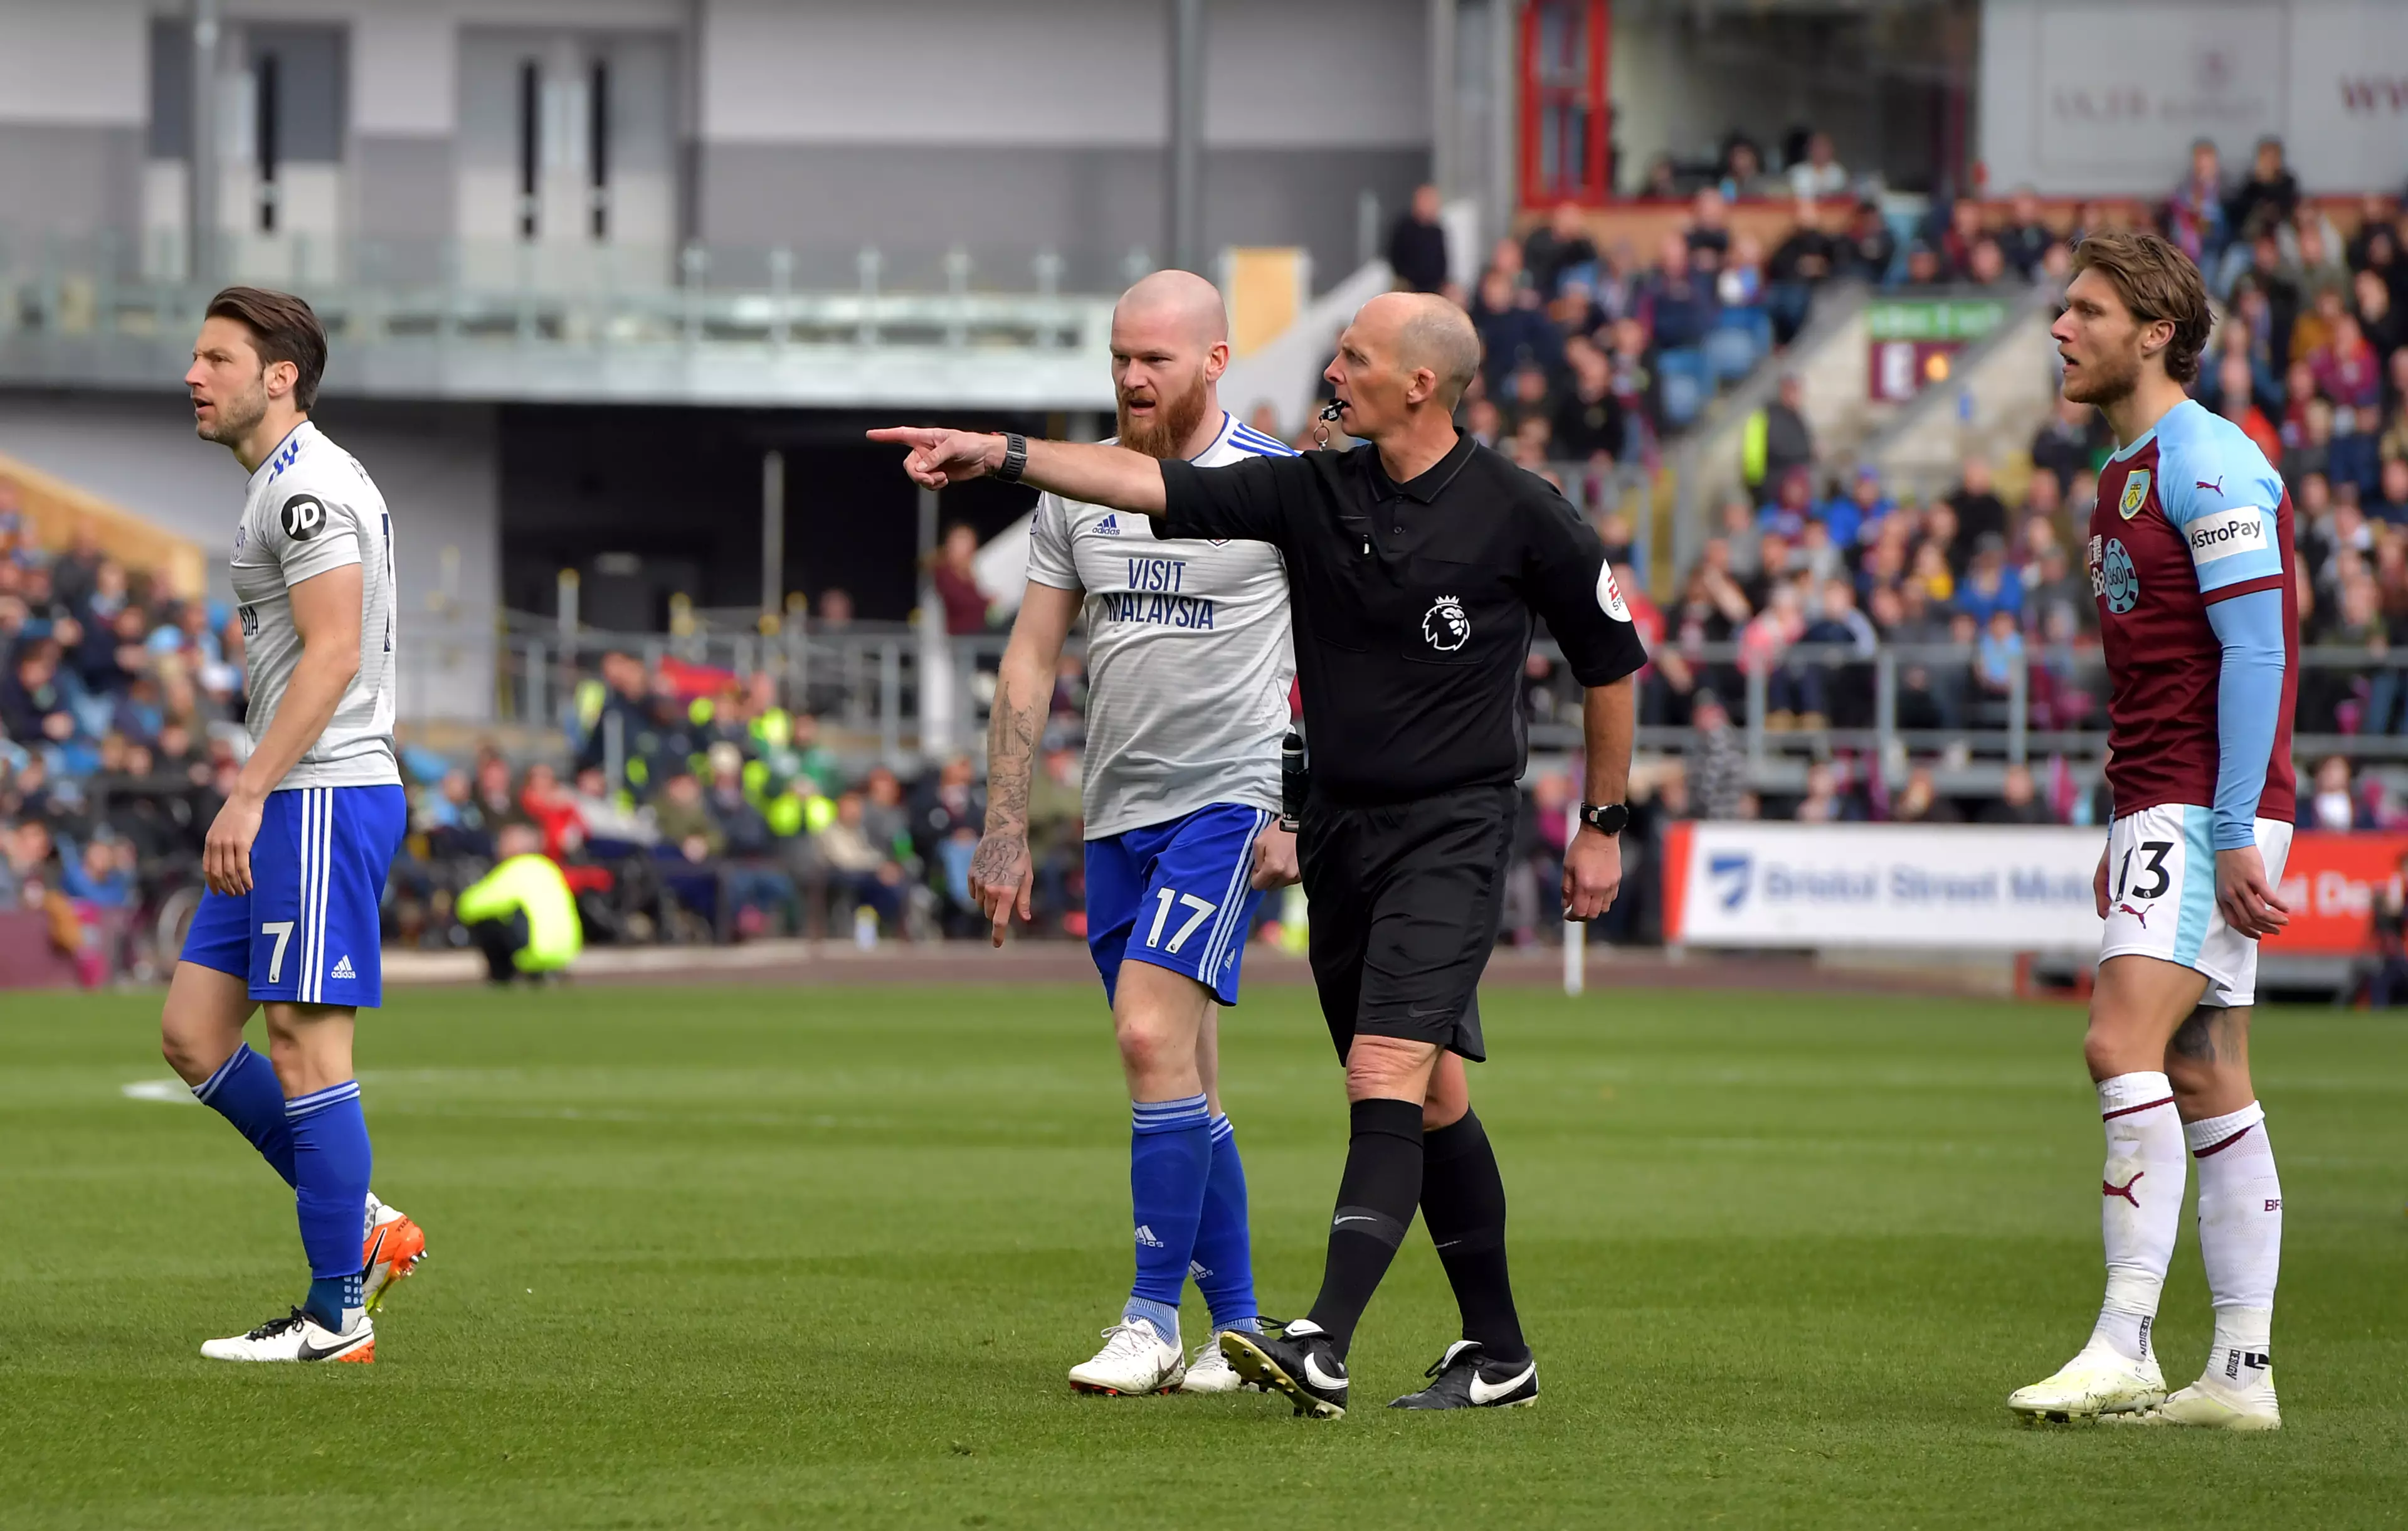 Mike Dean gave Cardiff a penalty against Burnley on Saturday before overturning his decision. Image: PA Images